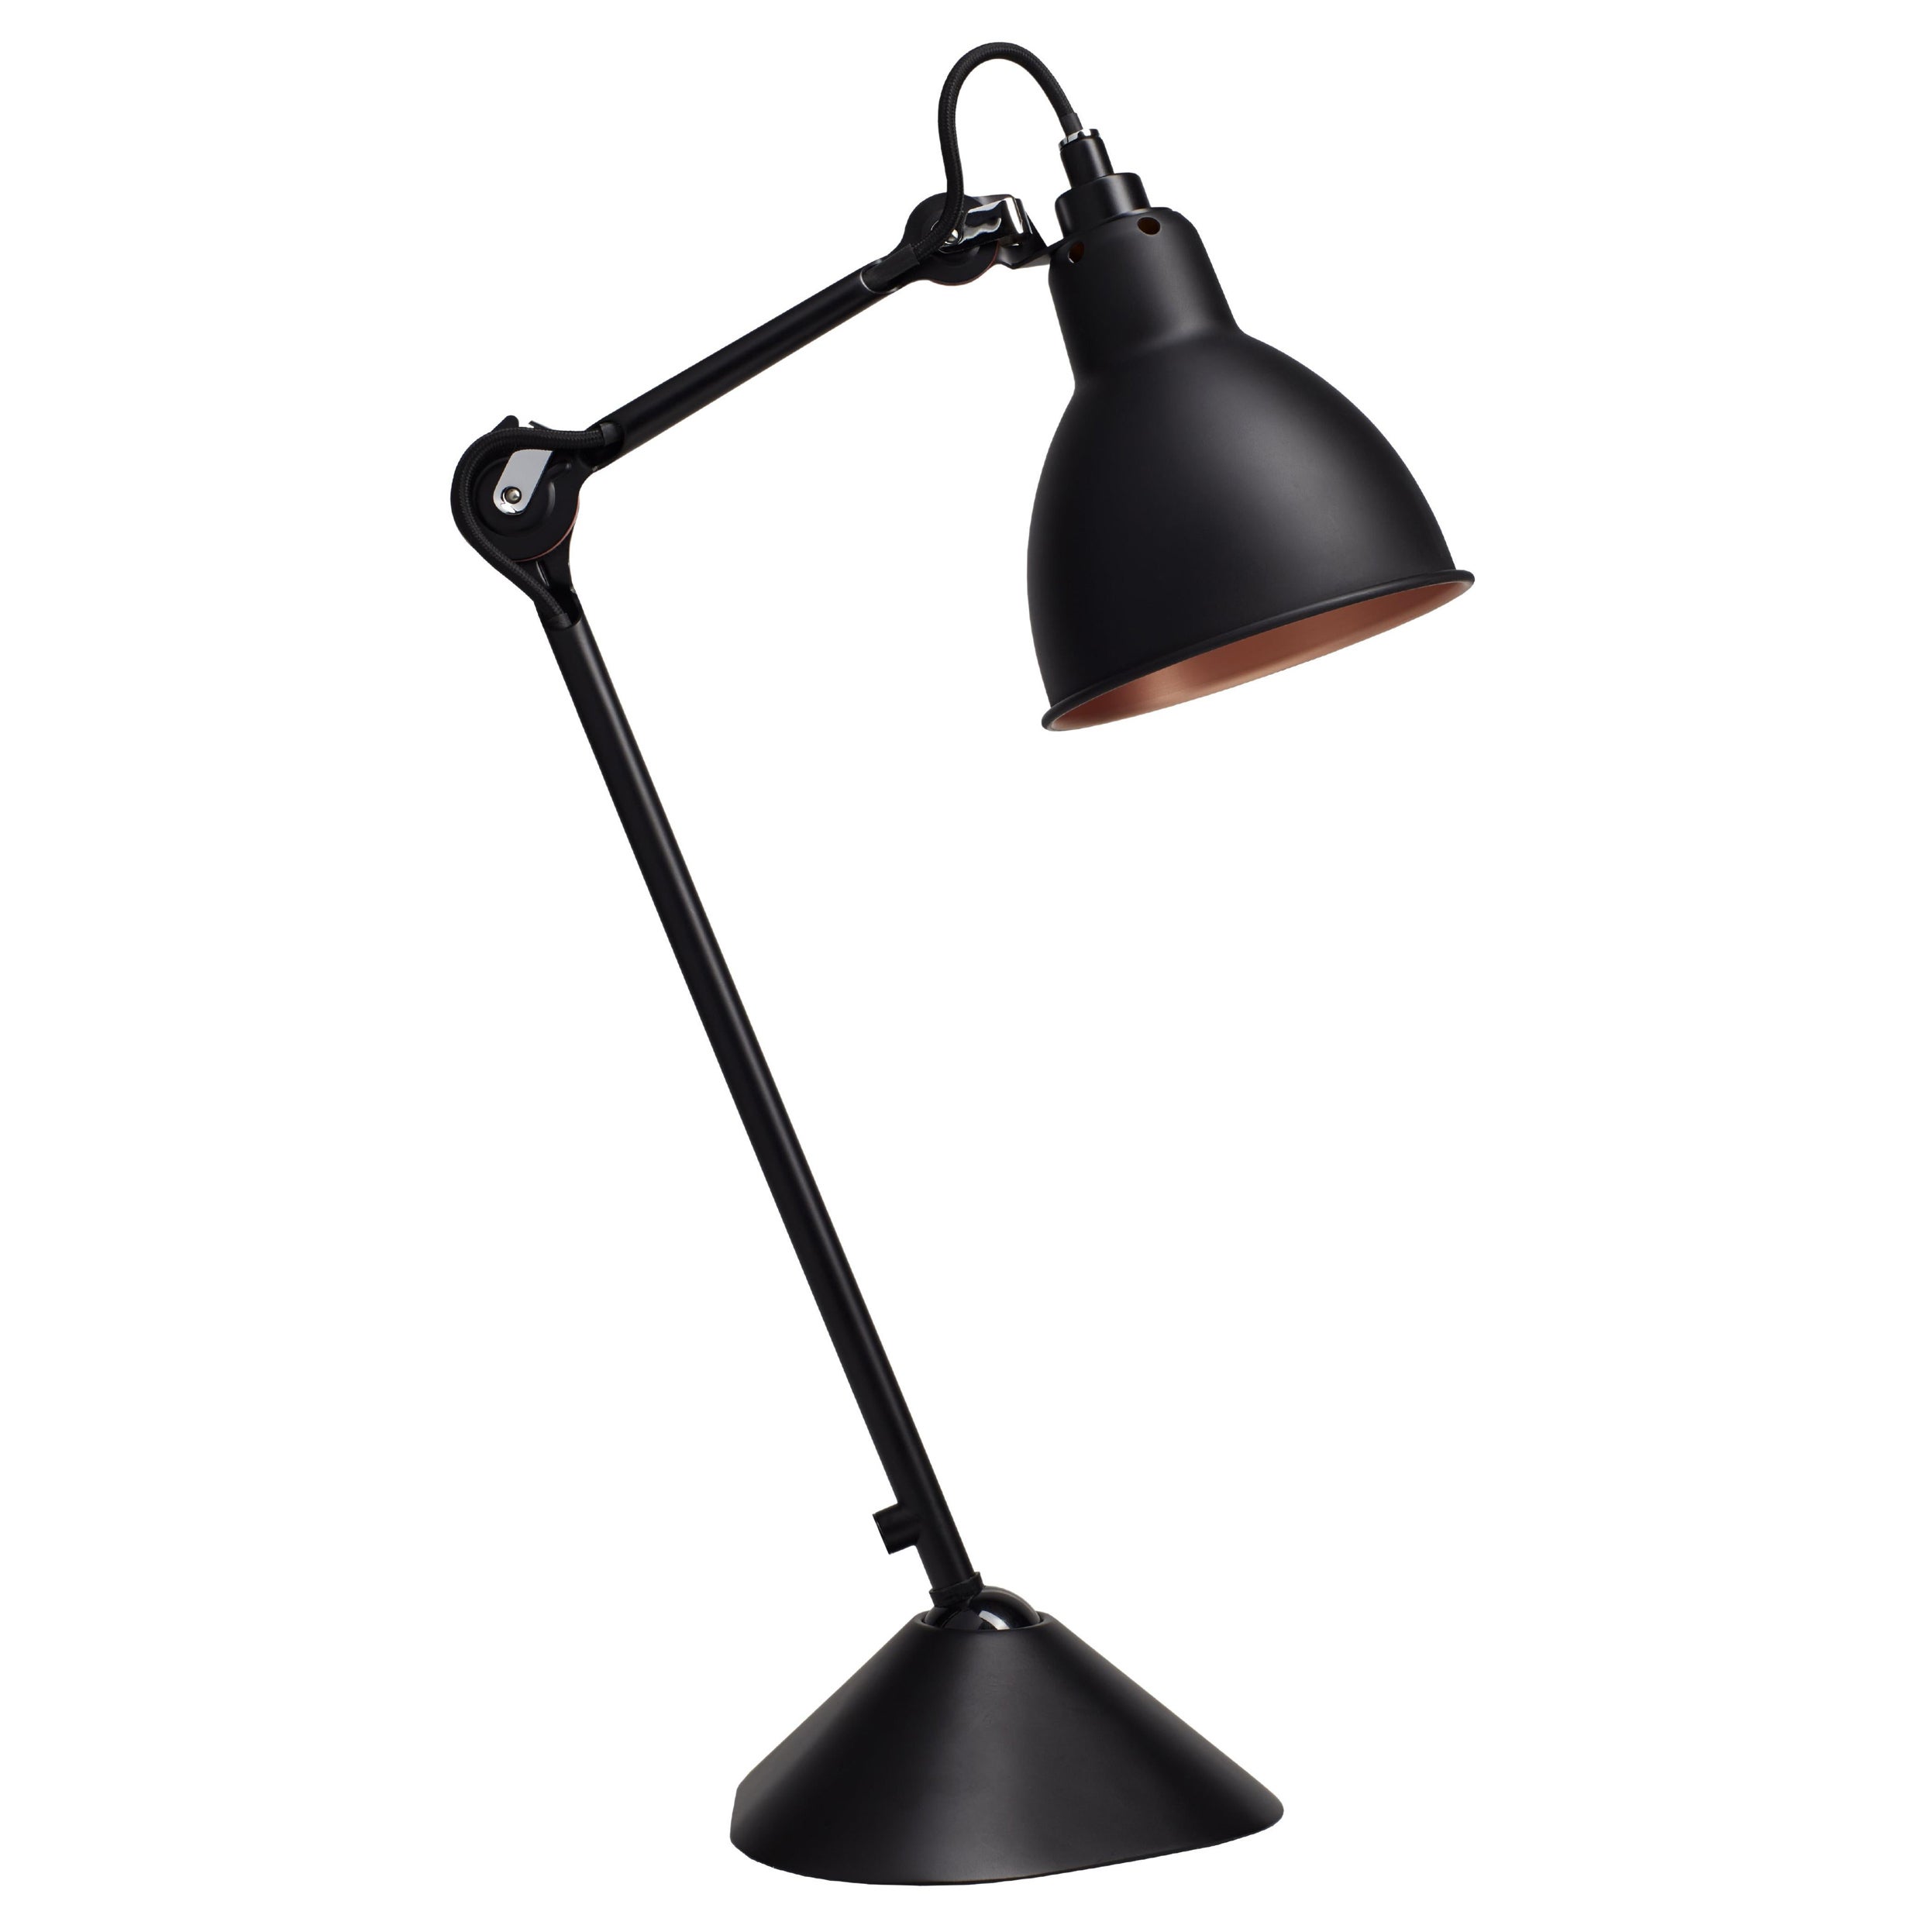 Black and Copper Lampe Gras N° 205 Table Lamp by Bernard-Albin Gras For Sale